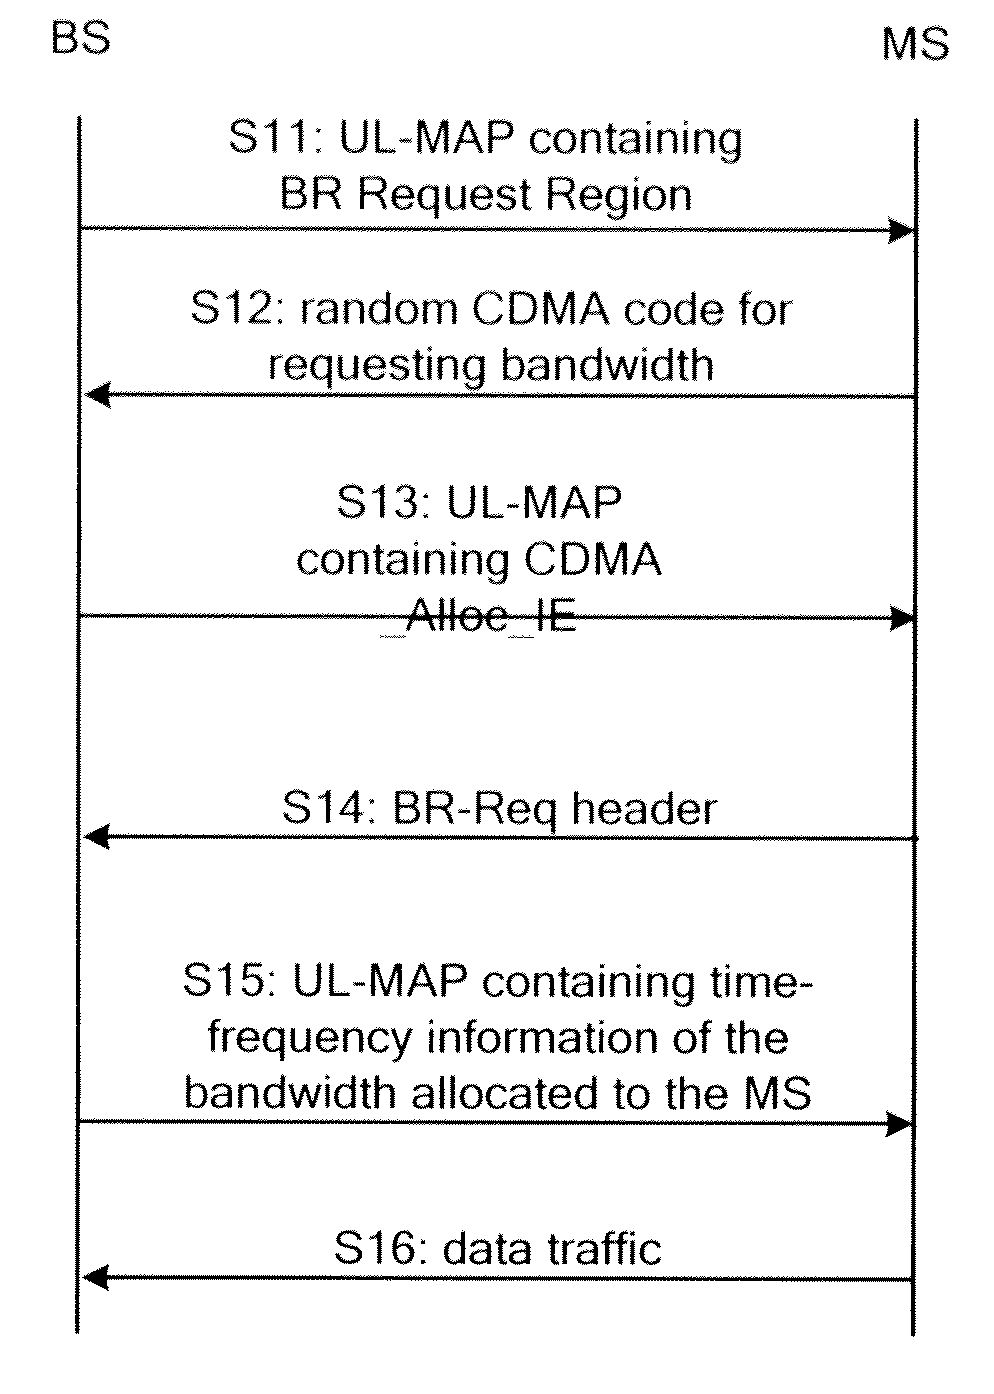 Method and device for requesting and allocating bandwidths in wireless communication systems